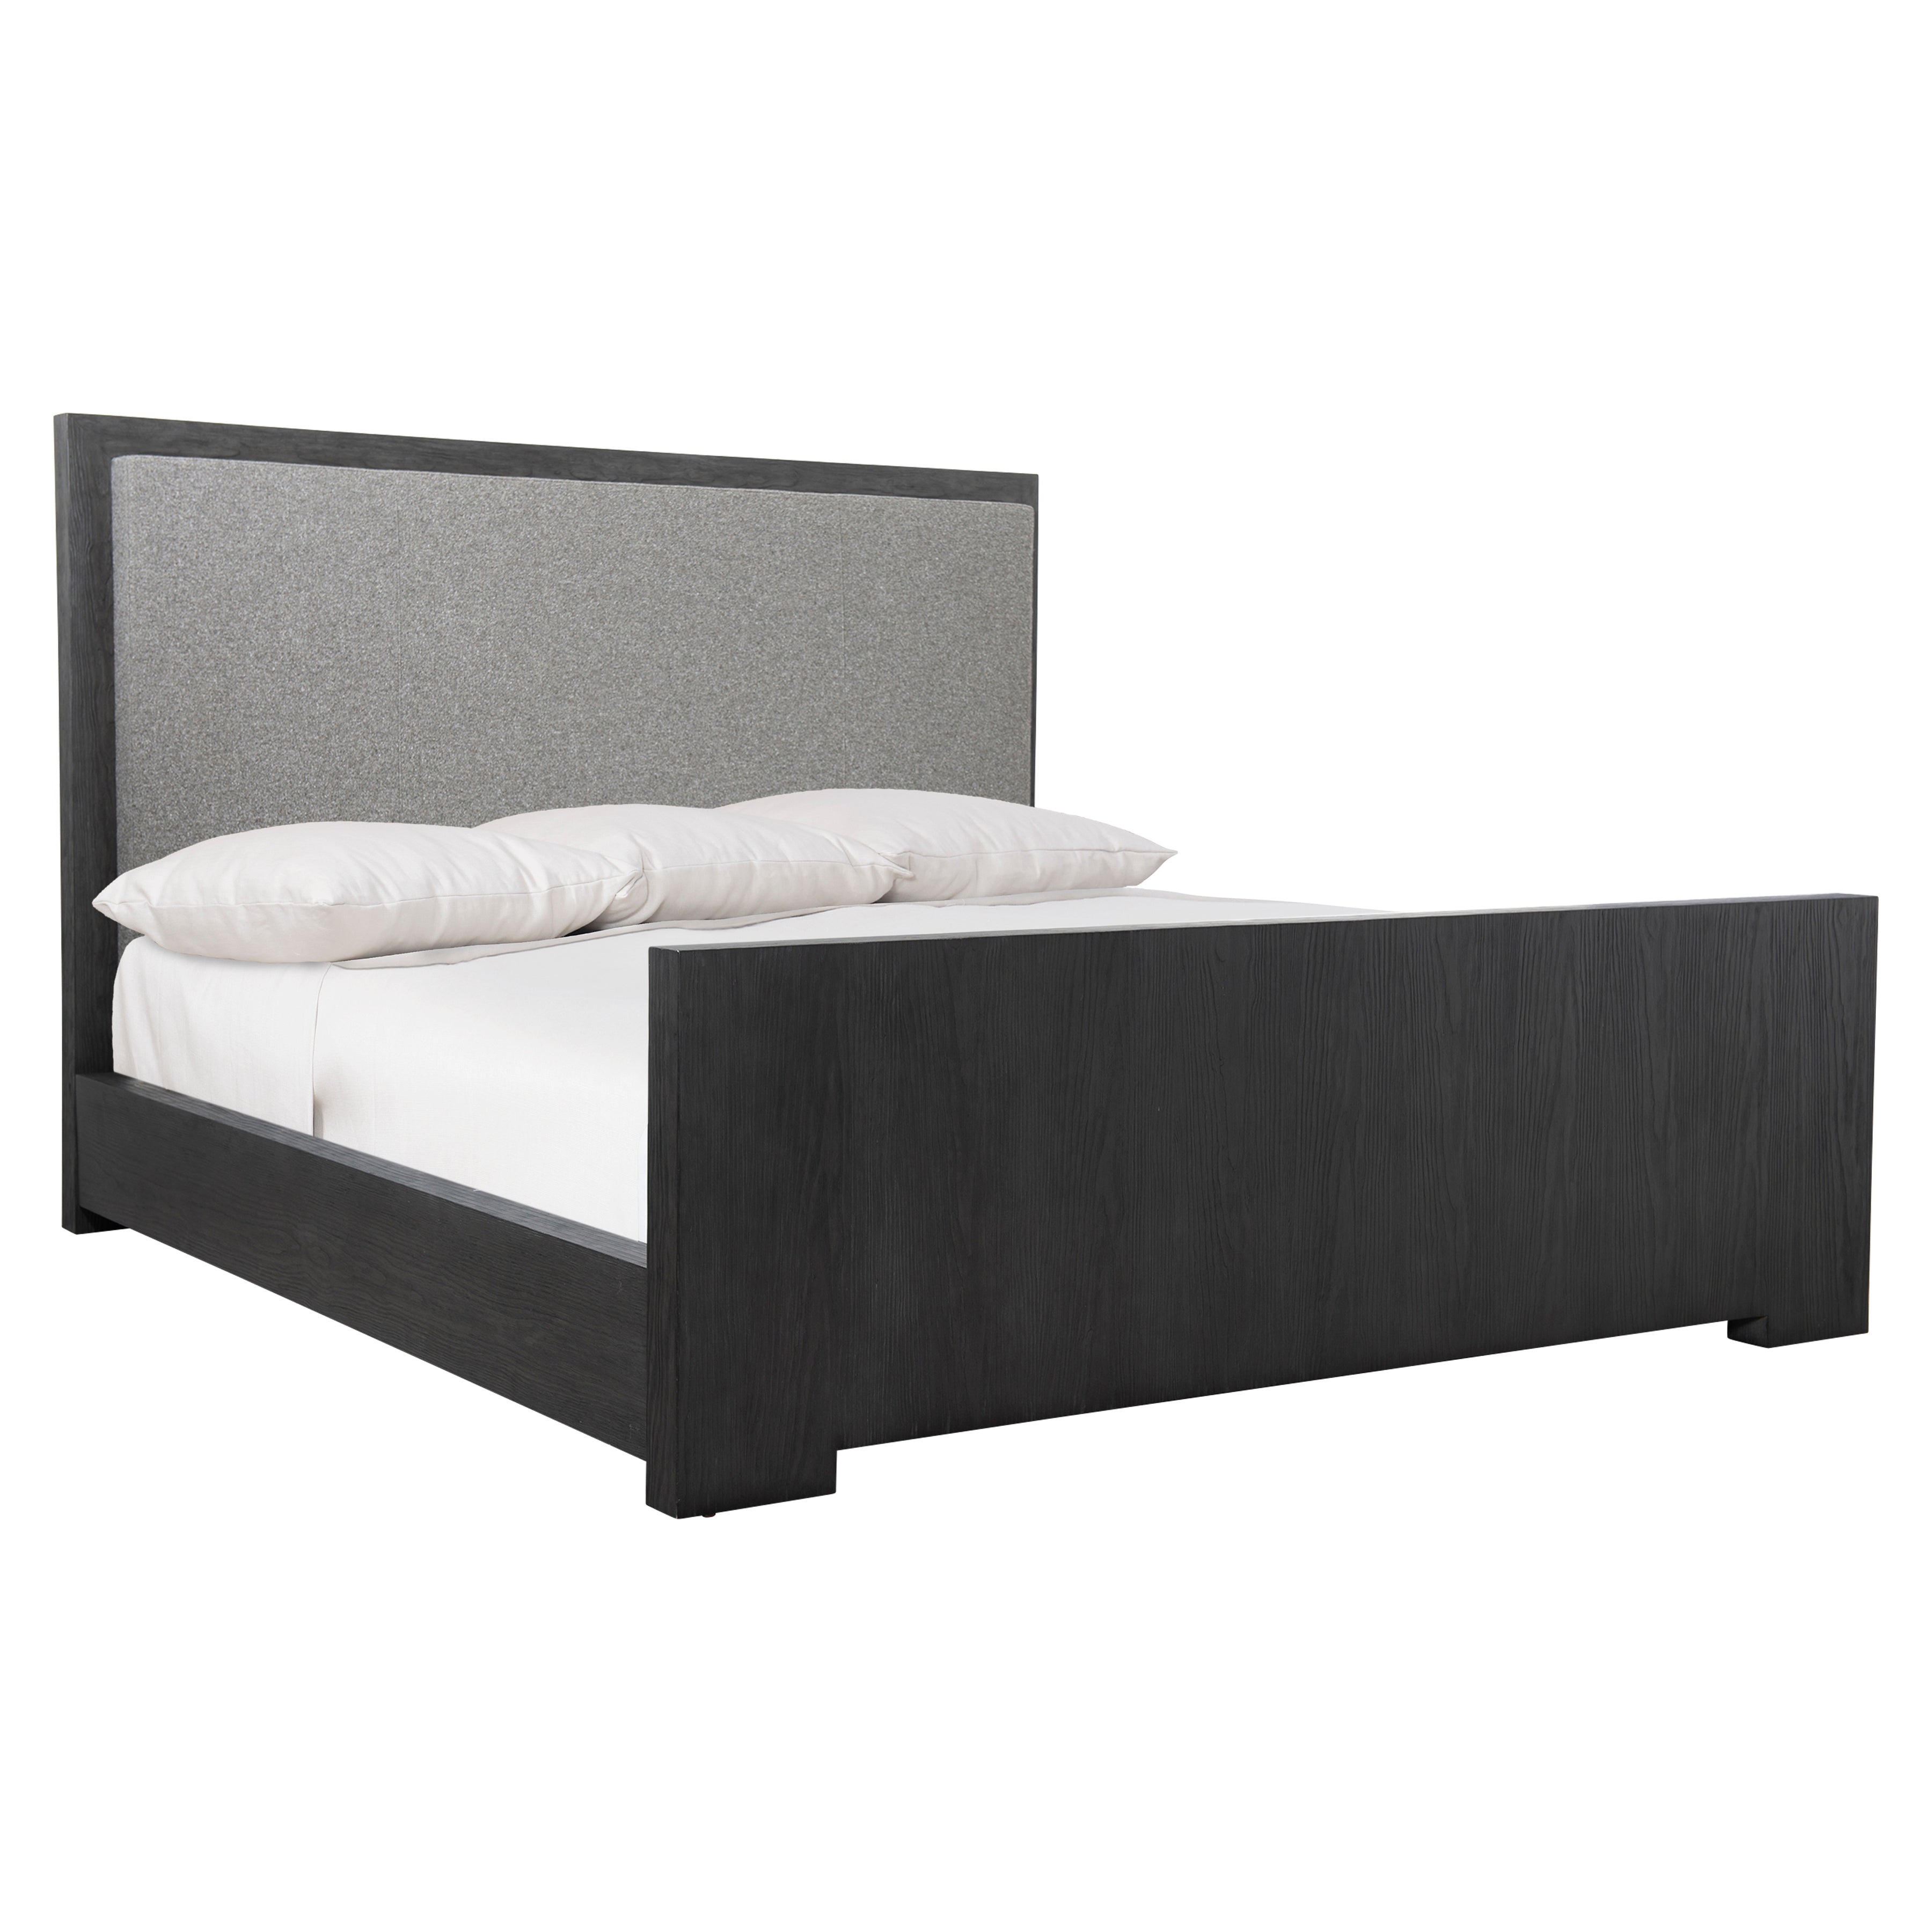 Trianon Queen Panel Bed in L'Ombre Wood Finish